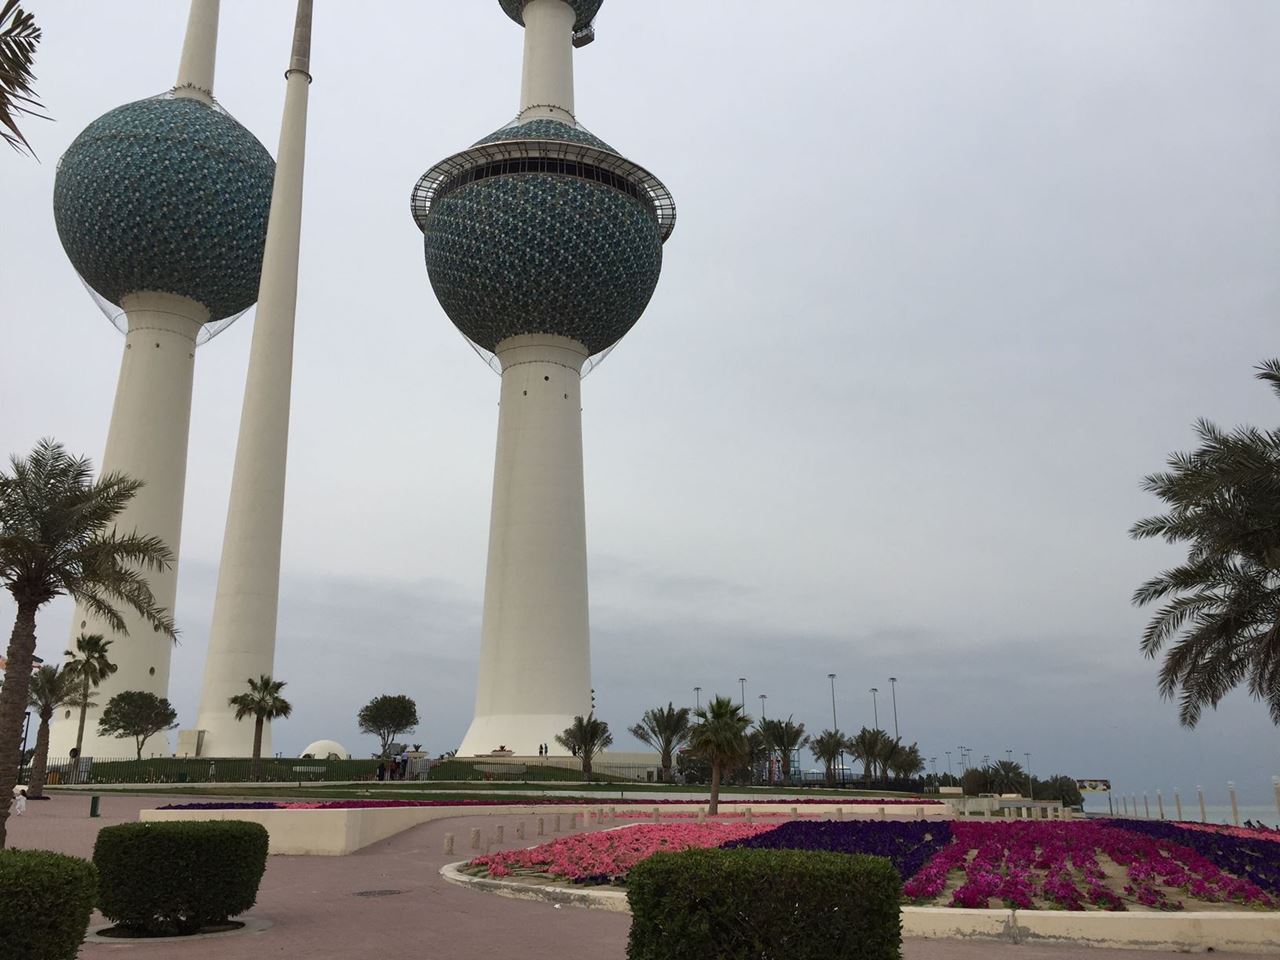 Kuwait Towers Ticket price and Opening hours